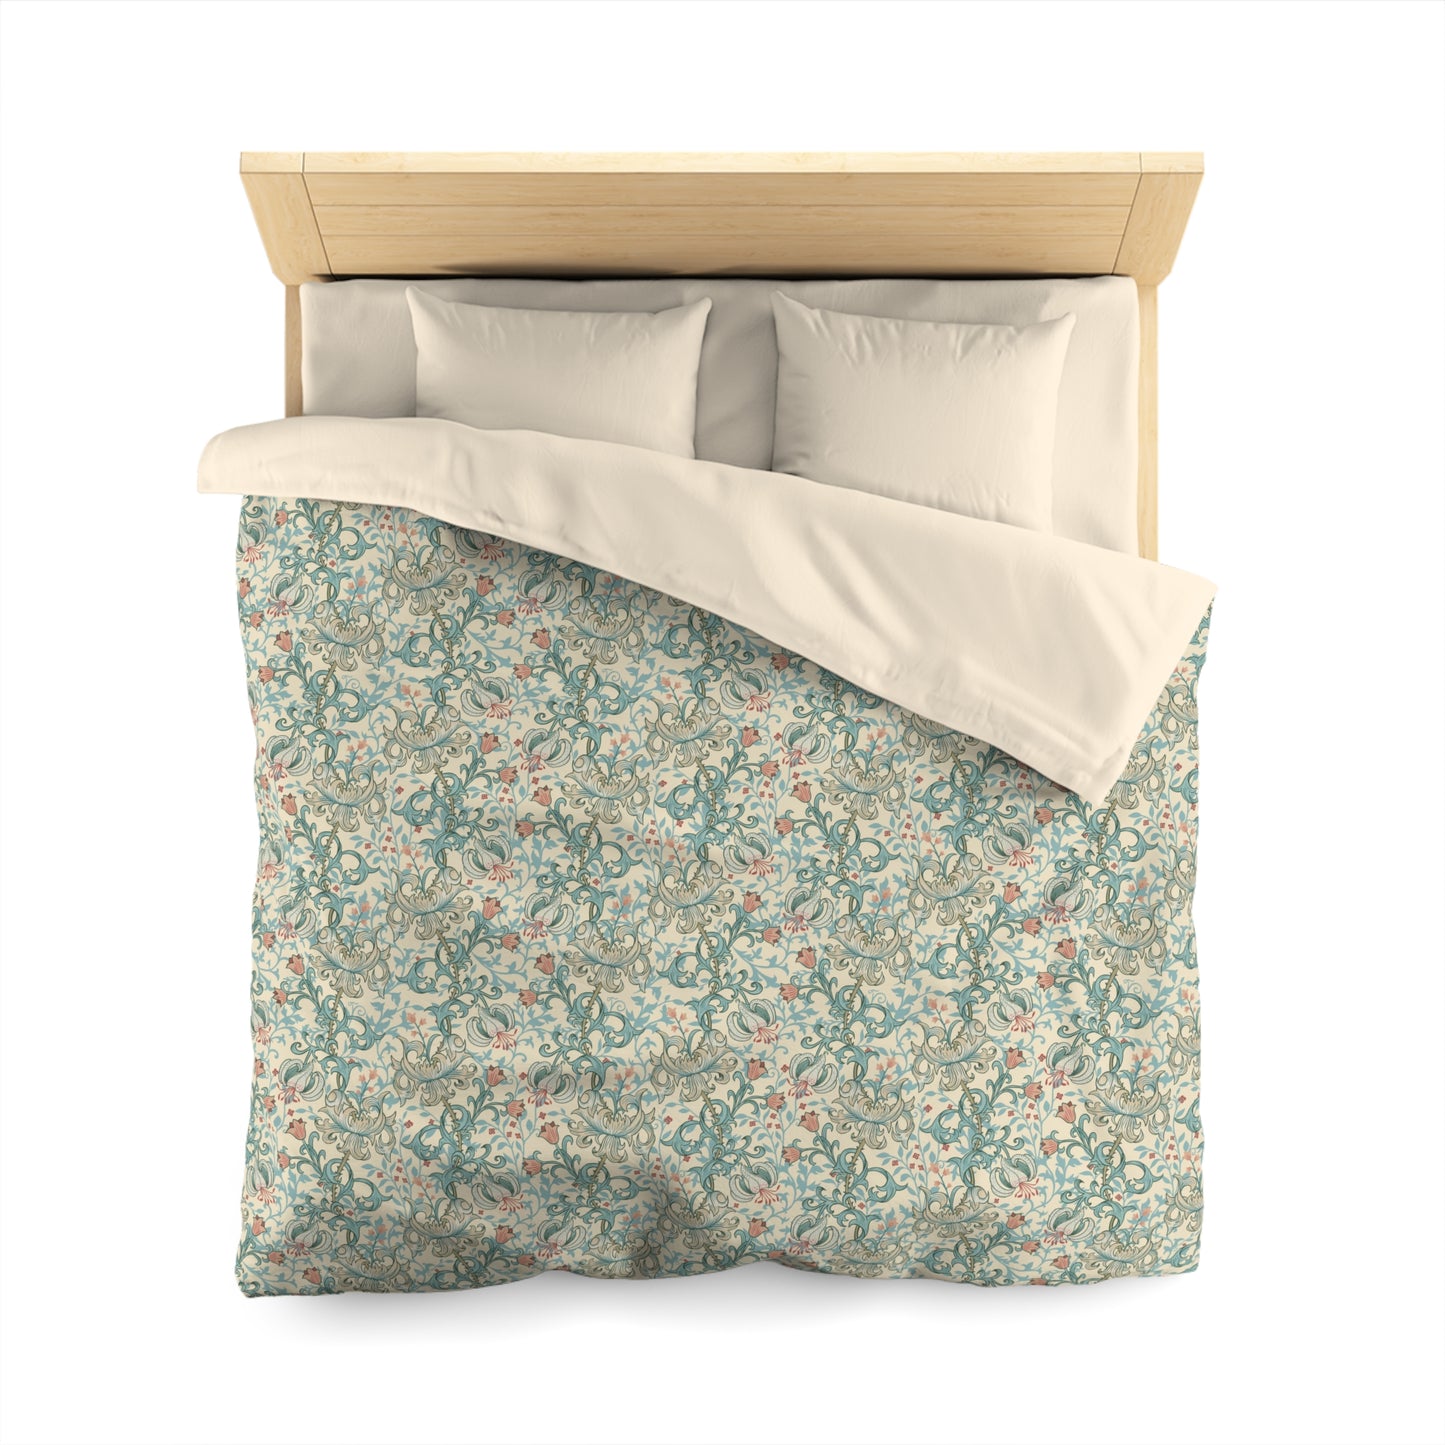 william-morris-co-duvet-cover-golden-lily-collection-mineral-7